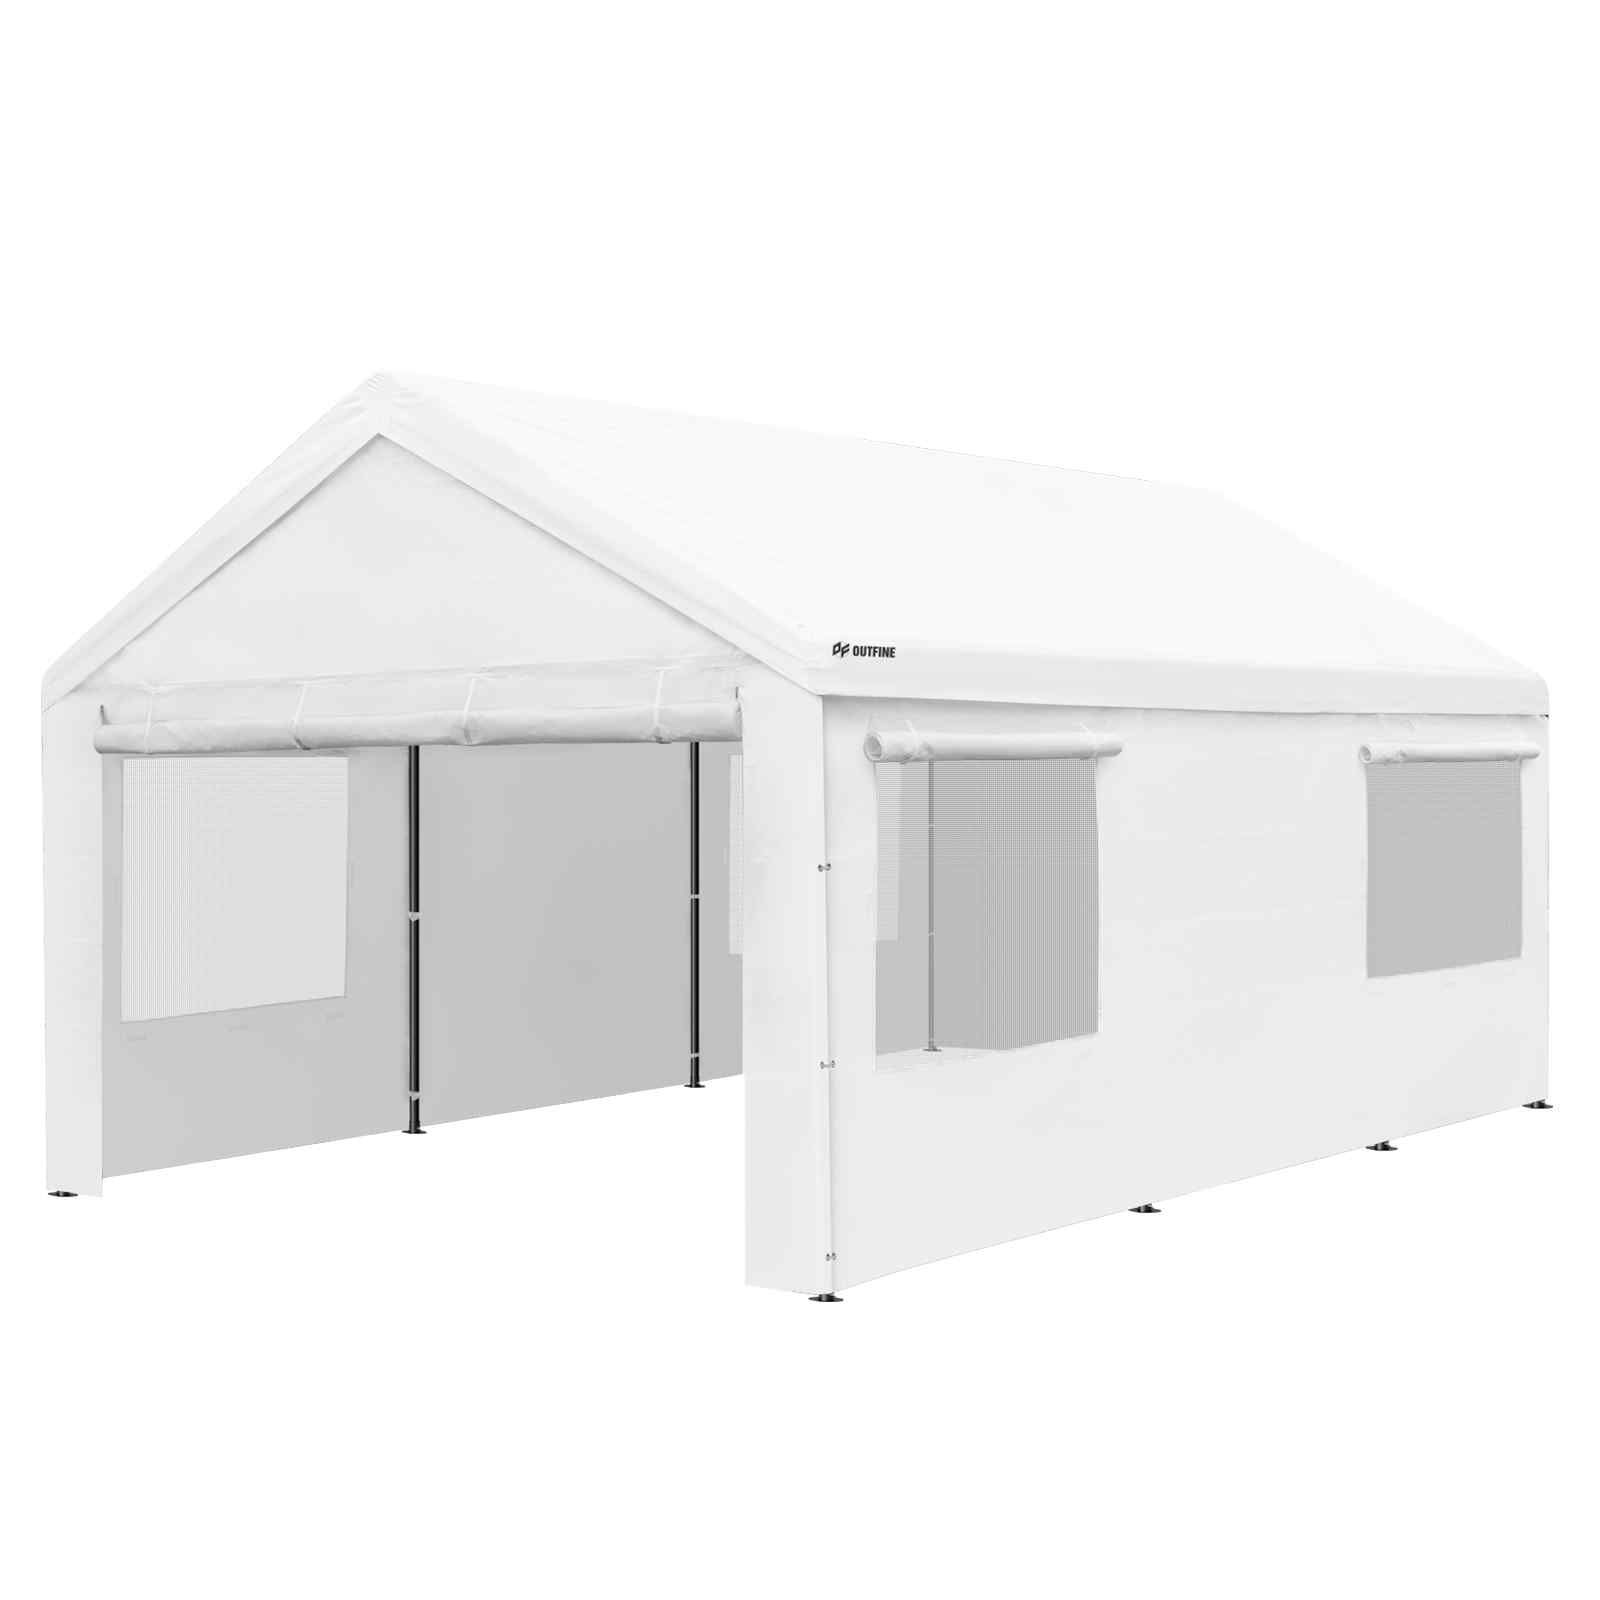 OUTFINE Carport Canopy 12x20 FT Heavy Duty Boat Car Canopy Garage with Removable Sidewalls and Roll-up Ventilated Windows, Tent Stakes x 12, Windproof Ropes x 4, Sandbags x 4 (White)